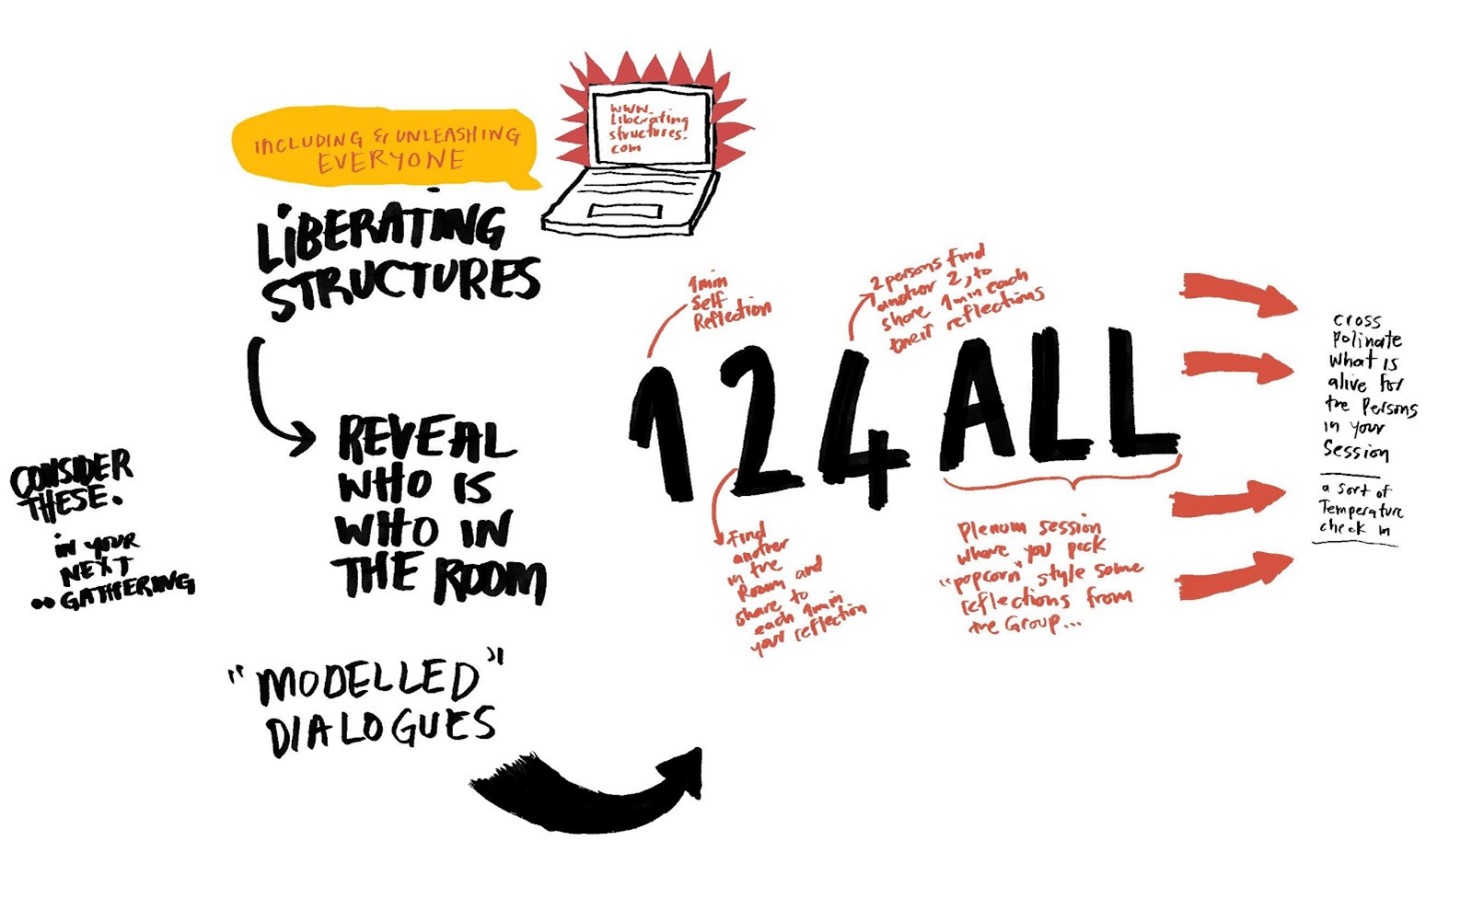 The structure of the Liberating Structures – ((1-2-4 All)). On the left it reads 'consider these in your next gathering'. On top of the structure is a drawing of a laptop, which has the website www.liberatingstructures.com open. On the left side of the laptop a yellow speech bubble reads 'including and unleashing everyone' and below the speech bubble reads 'liberating structures'. From the text 'liberating structures' an arrow points below to a text 'reveal who is who in the room'. Below that it reads '"modelled" dialogues' from which an arrow points to the right, curving upwards. On top of this arrow reads in big bold black characters 124 ALL. Above number one reads in tiny red characters '1 min self reclection'. Below the number two reads in tiny red characters 'find another in the room and share to each 1 min your reflection'. Above number four reads '2 persons find another 2, to share 1 min each their reflections'. Below ALL reads 'plenum session whove you pick "popcorn" style some reflections from the group...'. On the left side of the 124 ALL are four read arrows, which point to a text that reads 'cross pollinate what is alive for the persons in your sessions. a sort of temperature check in'.